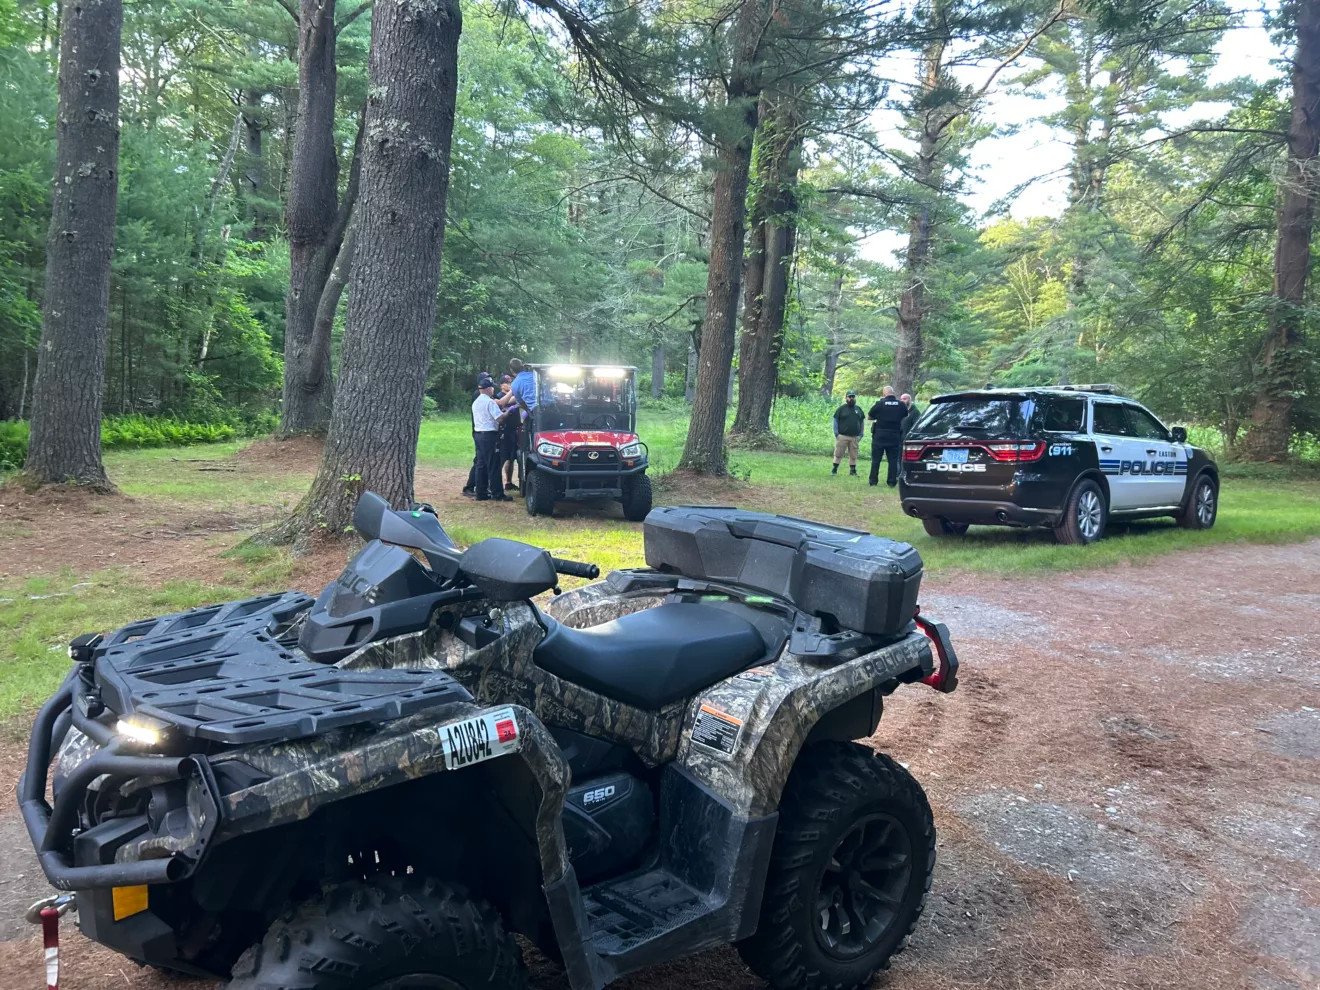 All-terrain vehicles and first responders at rescue scene